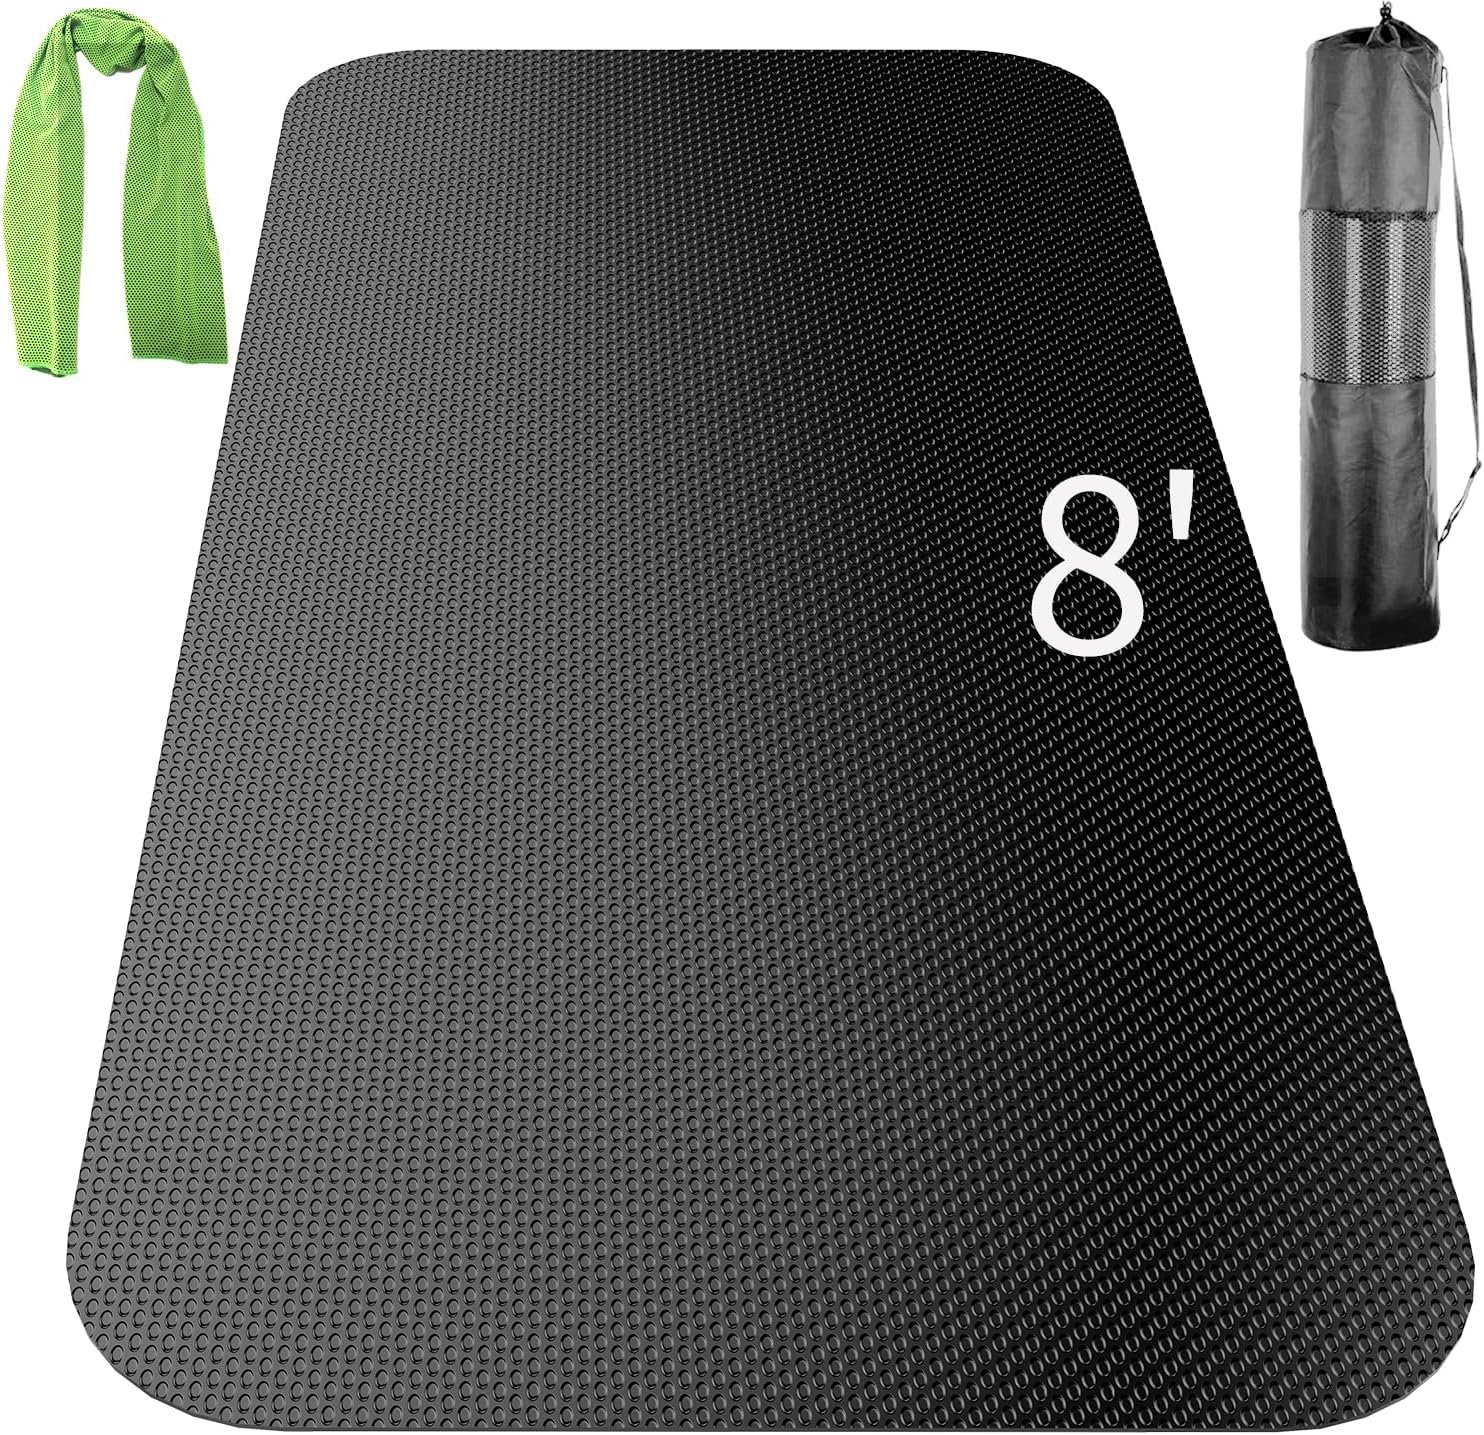 Large Exercise Mat review